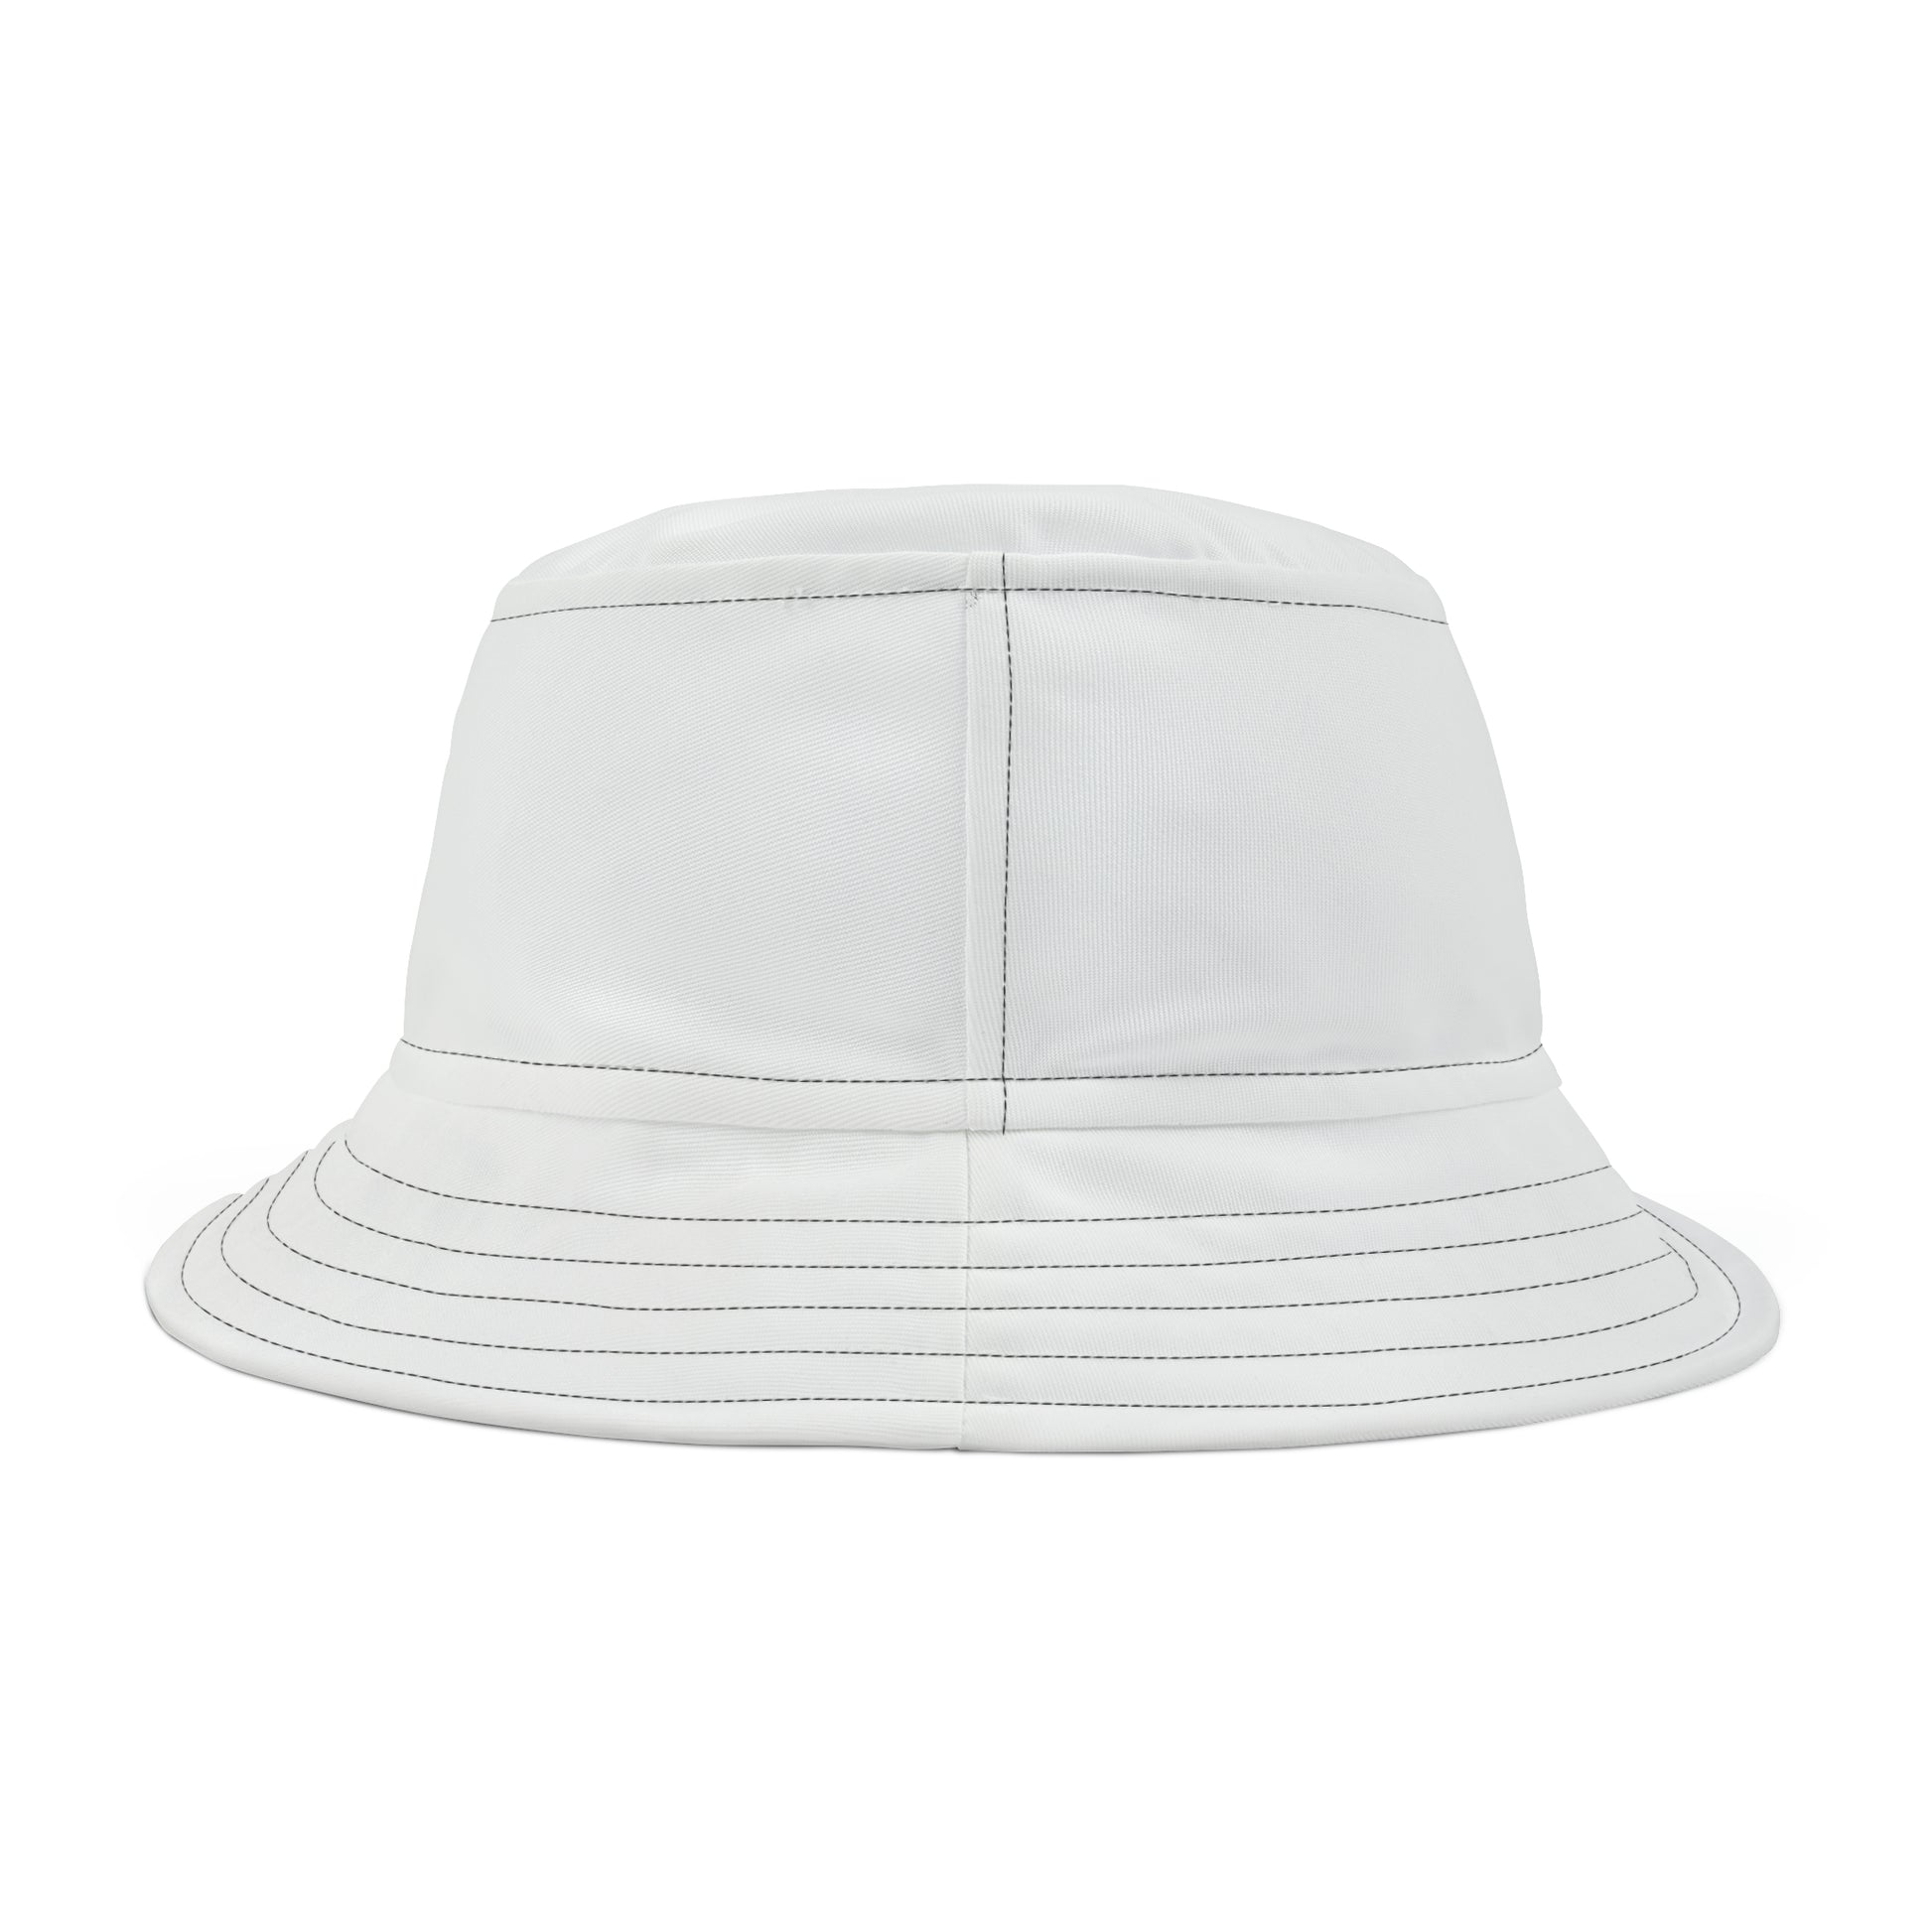 Christ Carried My Burdens So I Could Thrive Christian Bucket Hat (AOP) Printify